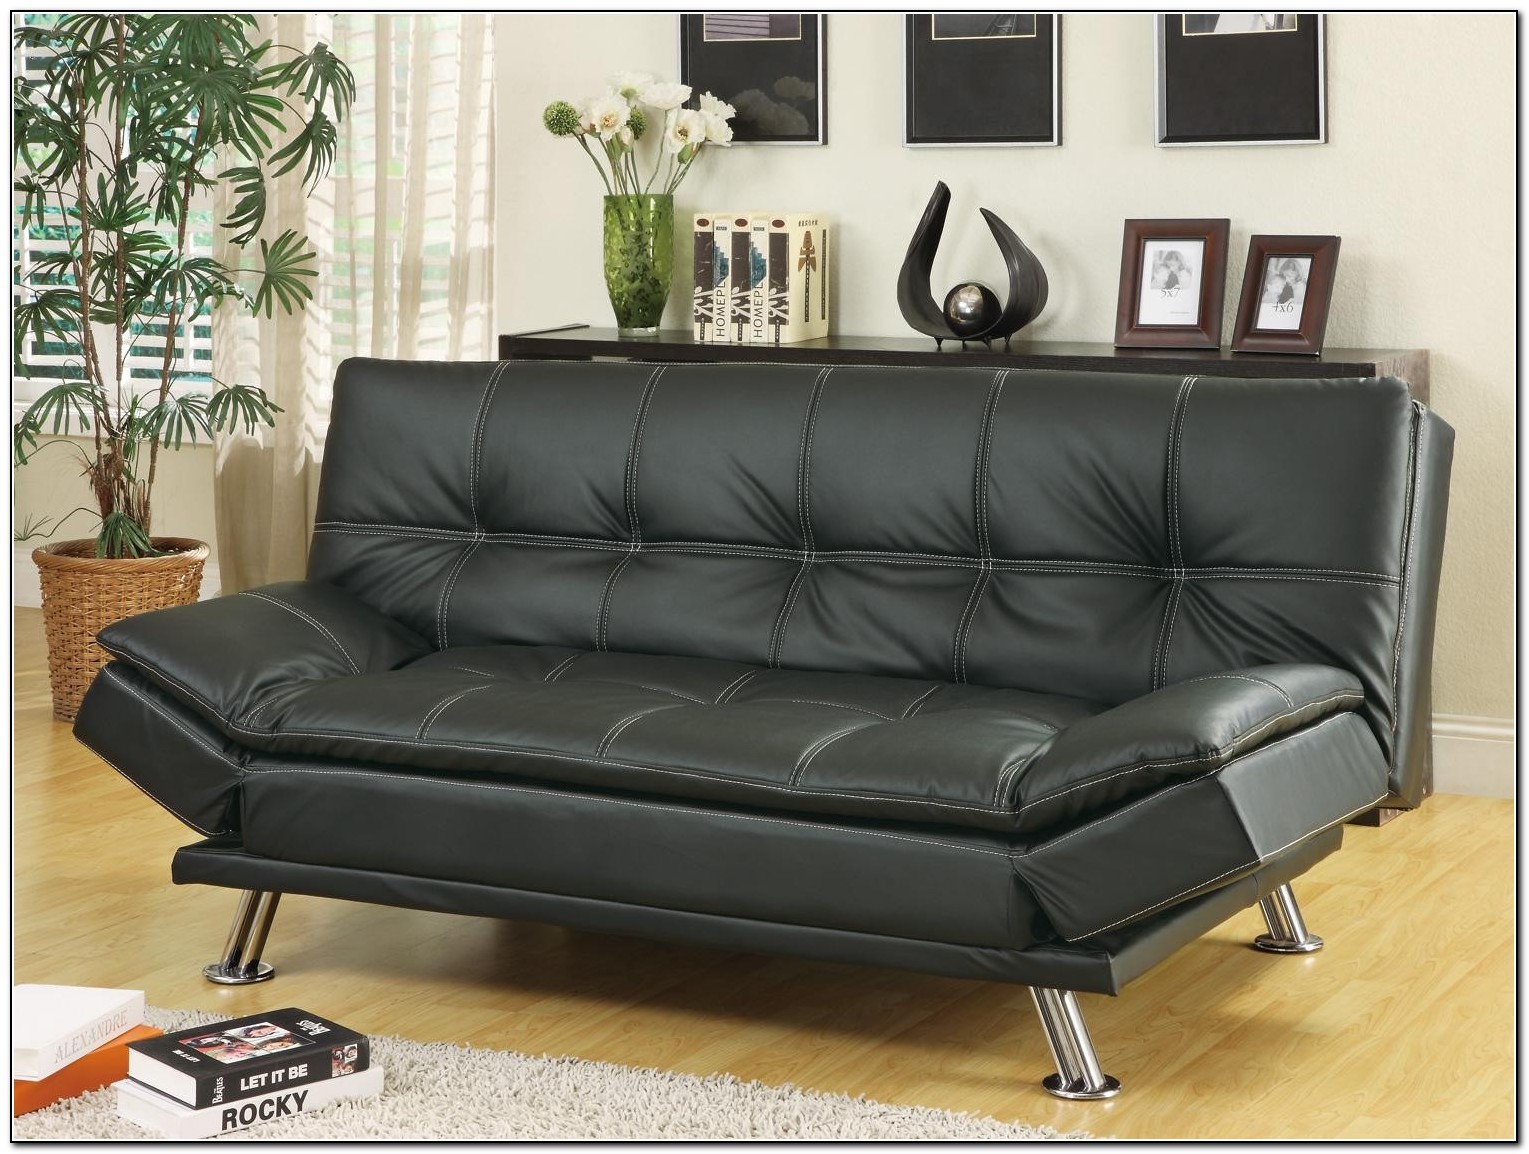 Futon Sofa Bed With Removable Arm Rests Brown Vinyl Leather